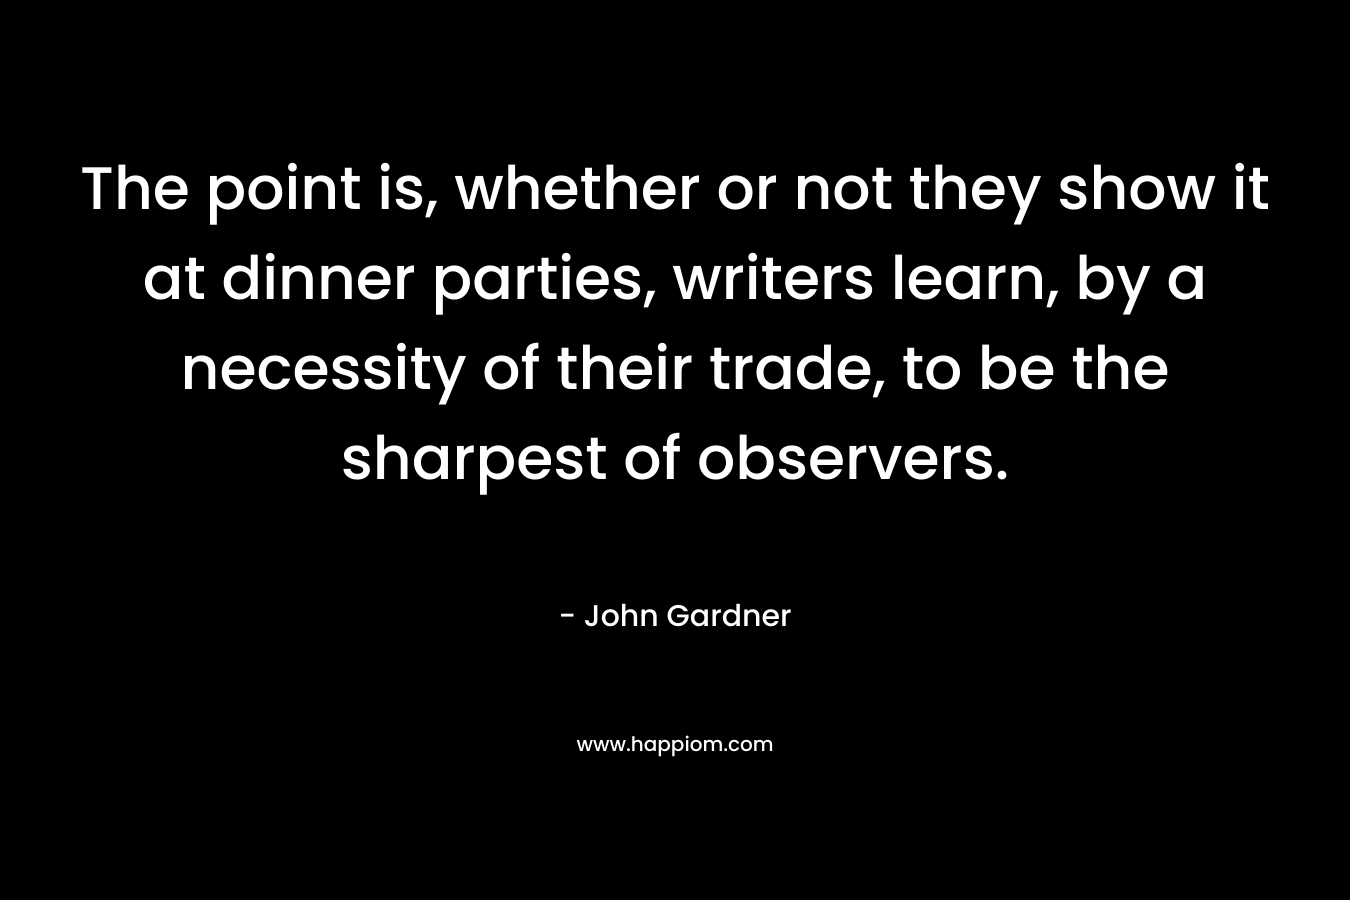 The point is, whether or not they show it at dinner parties, writers learn, by a necessity of their trade, to be the sharpest of observers. – John Gardner